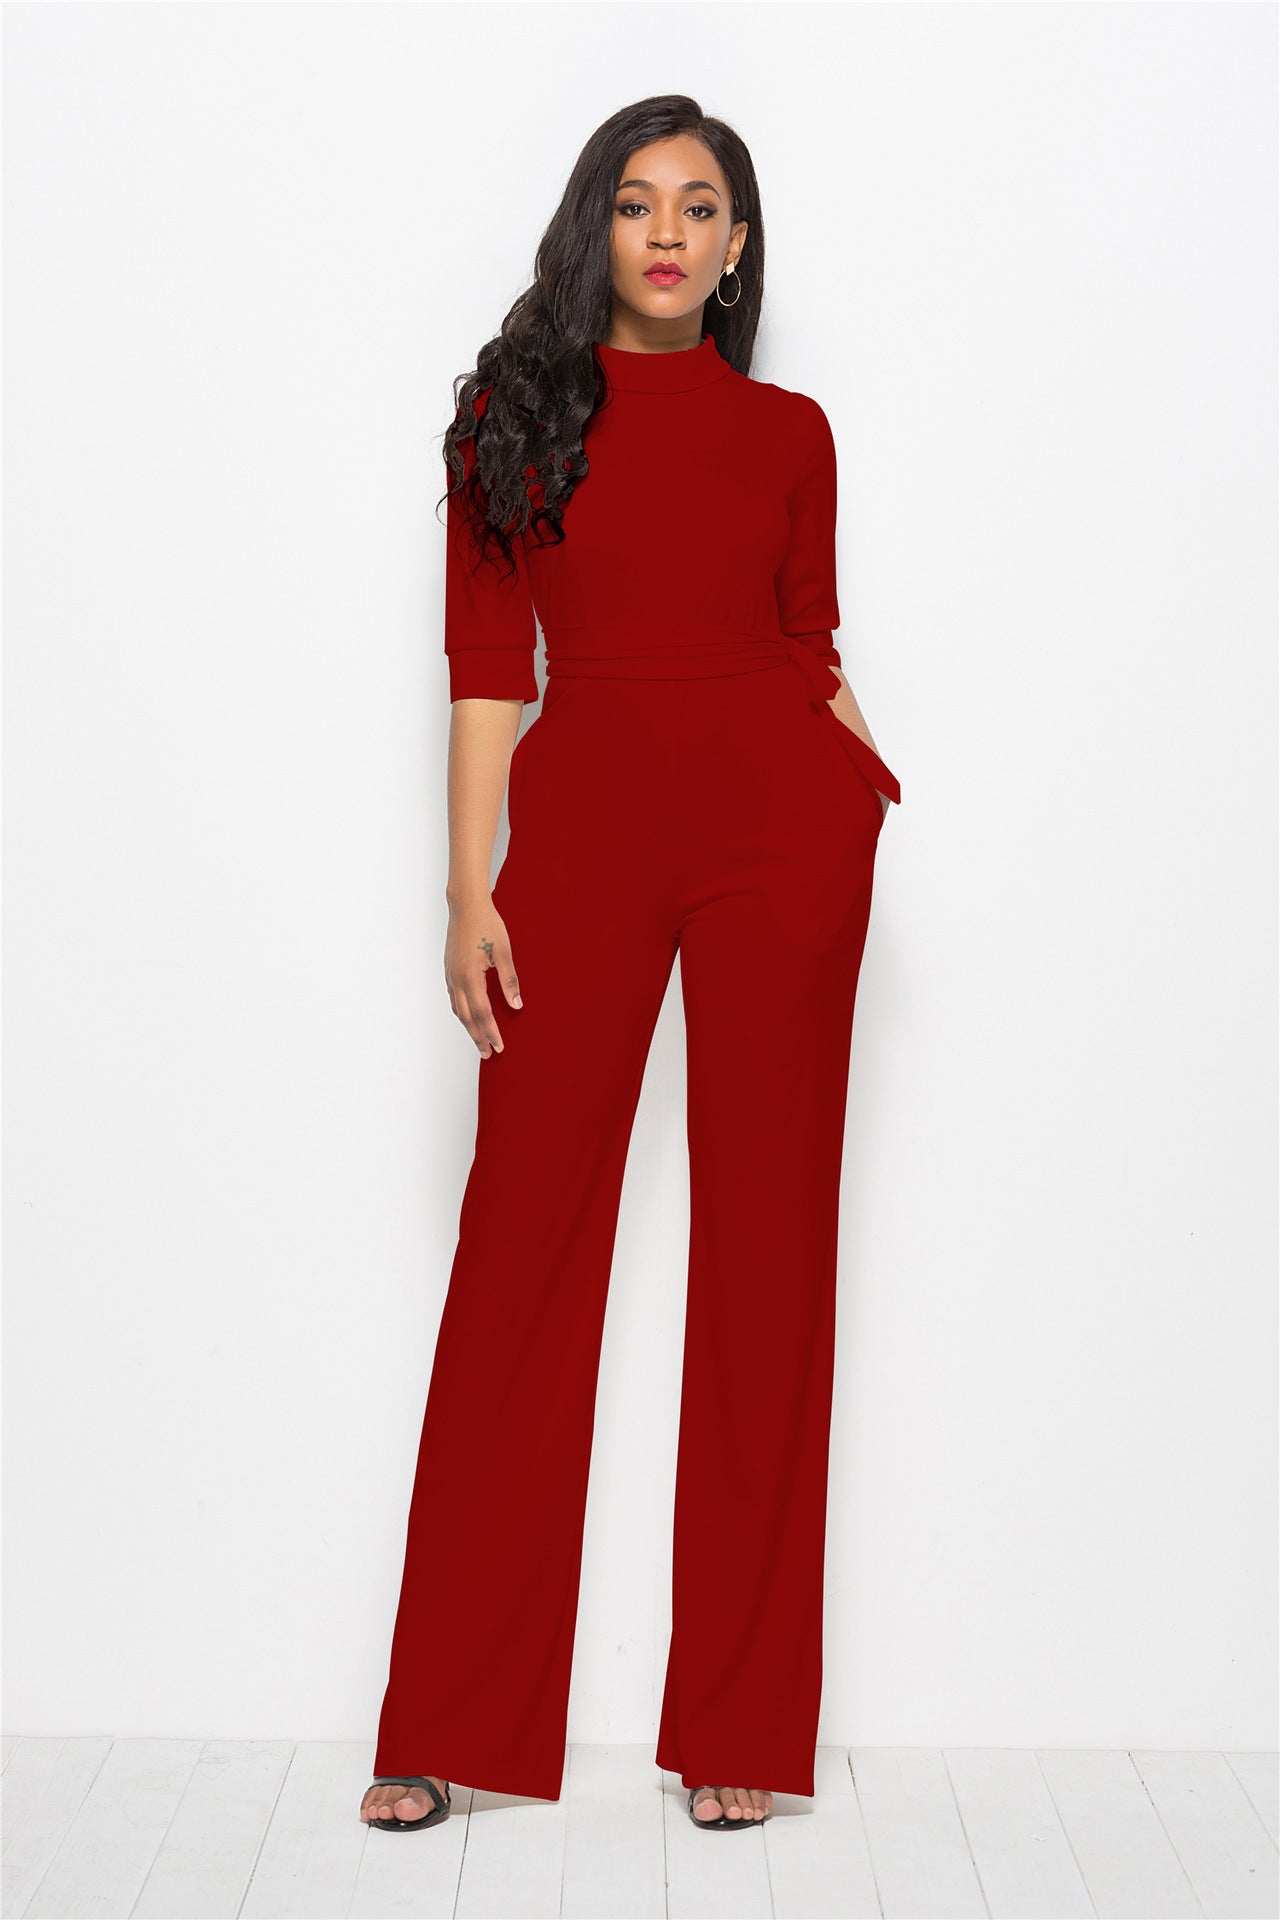 Sexy Fashion Women Fall Jumspuits-Women Suits-Red-S-Free Shipping at meselling99